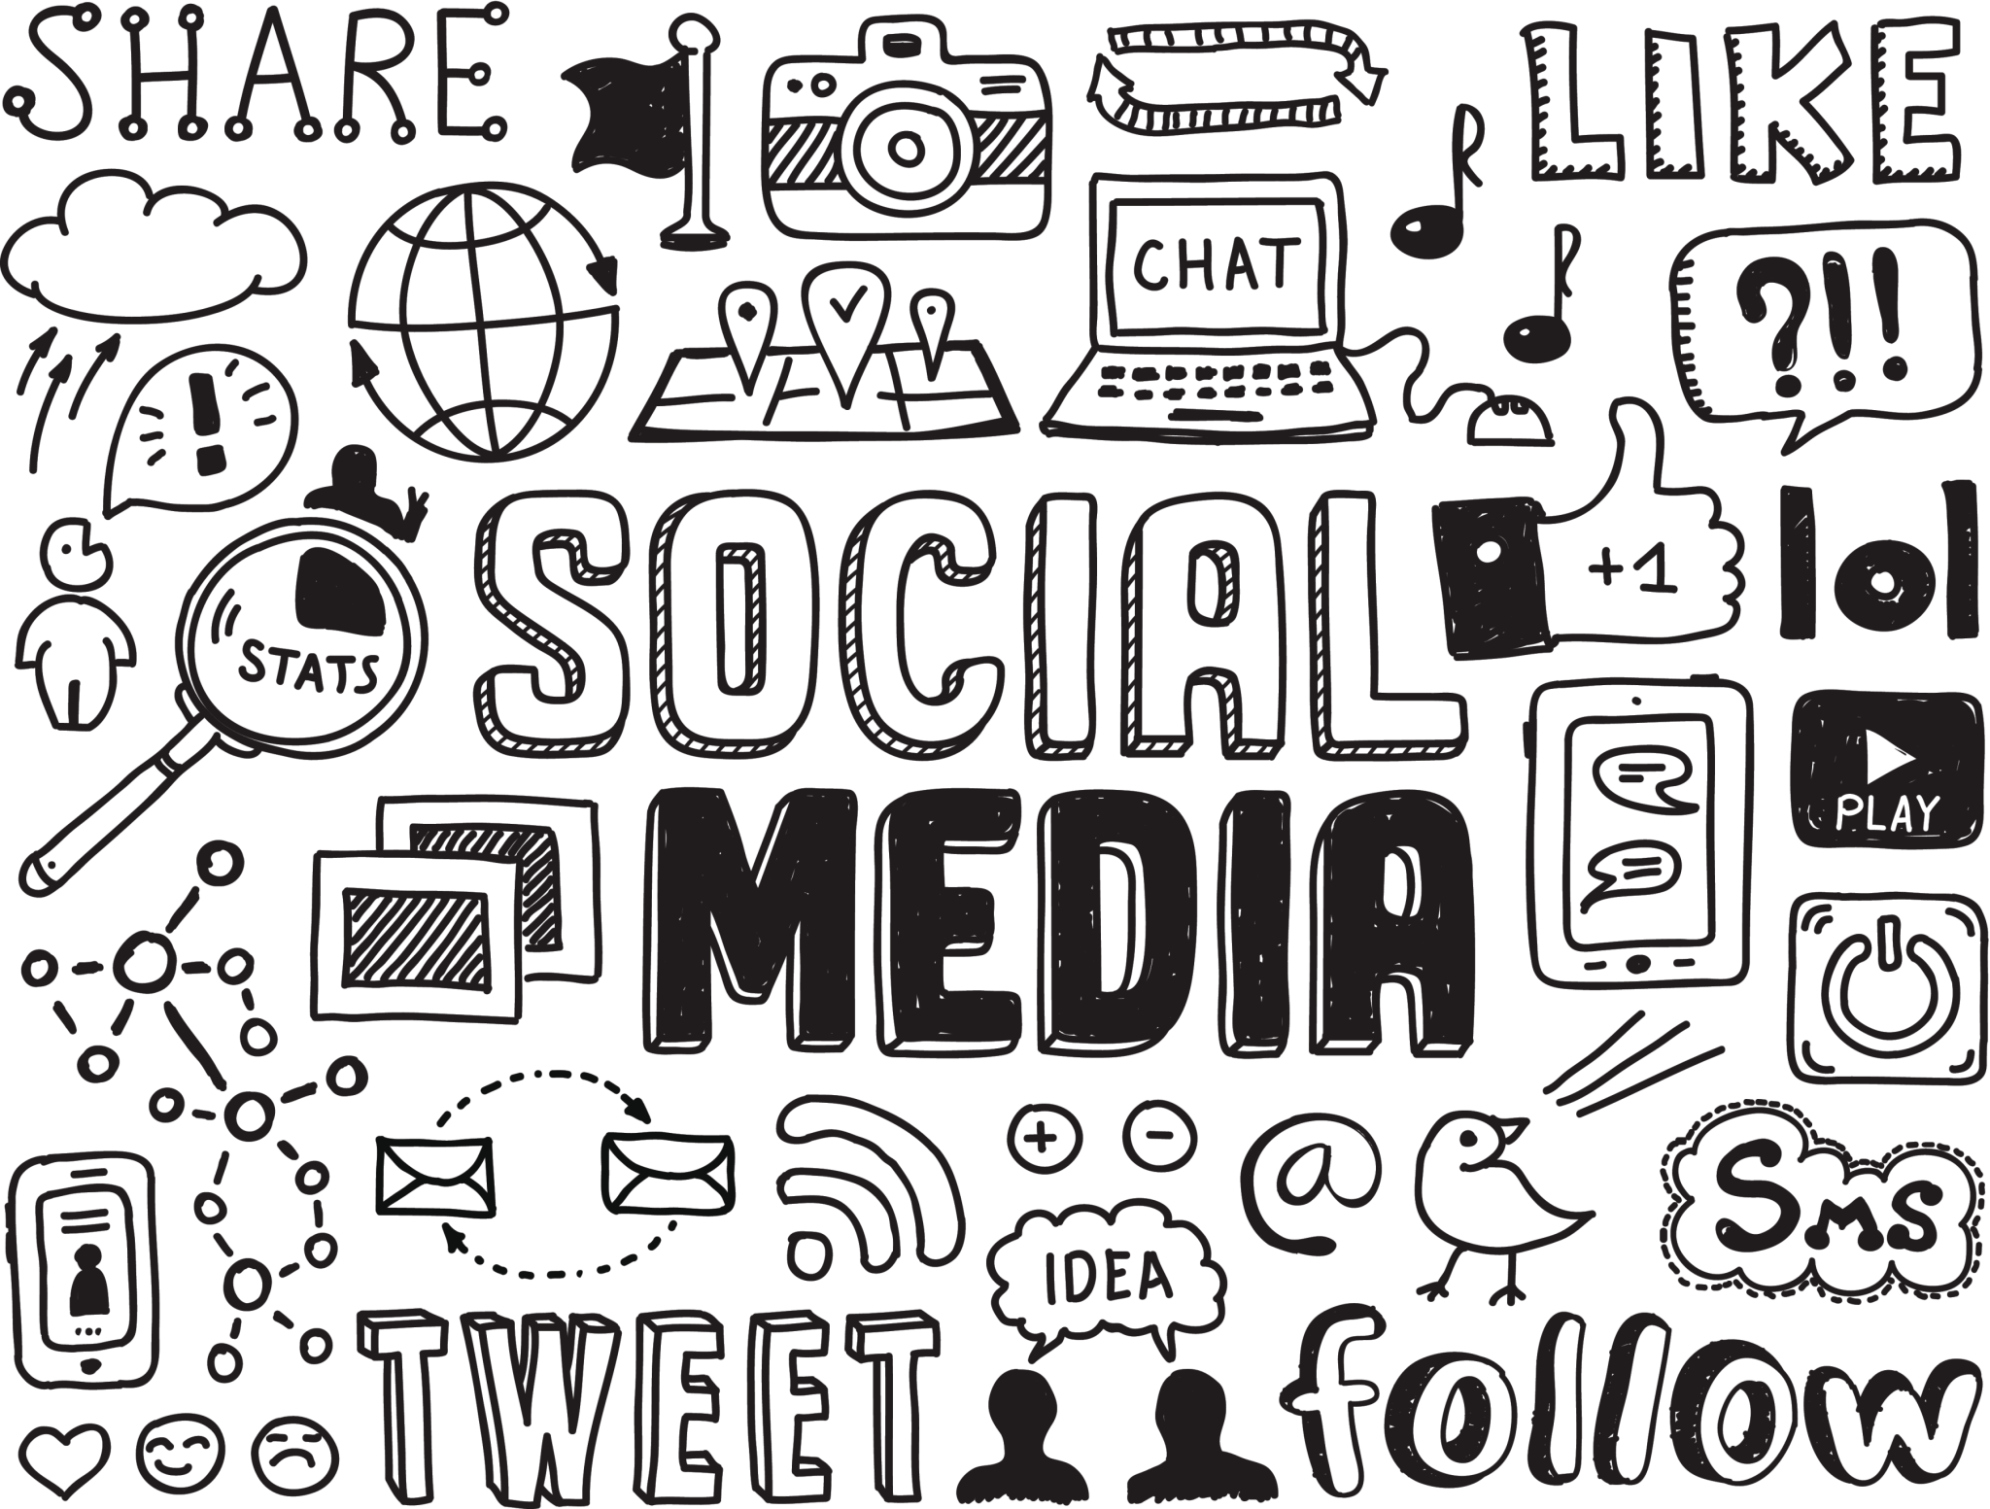 How meeting managers and social media managers work together | MeetingsNet